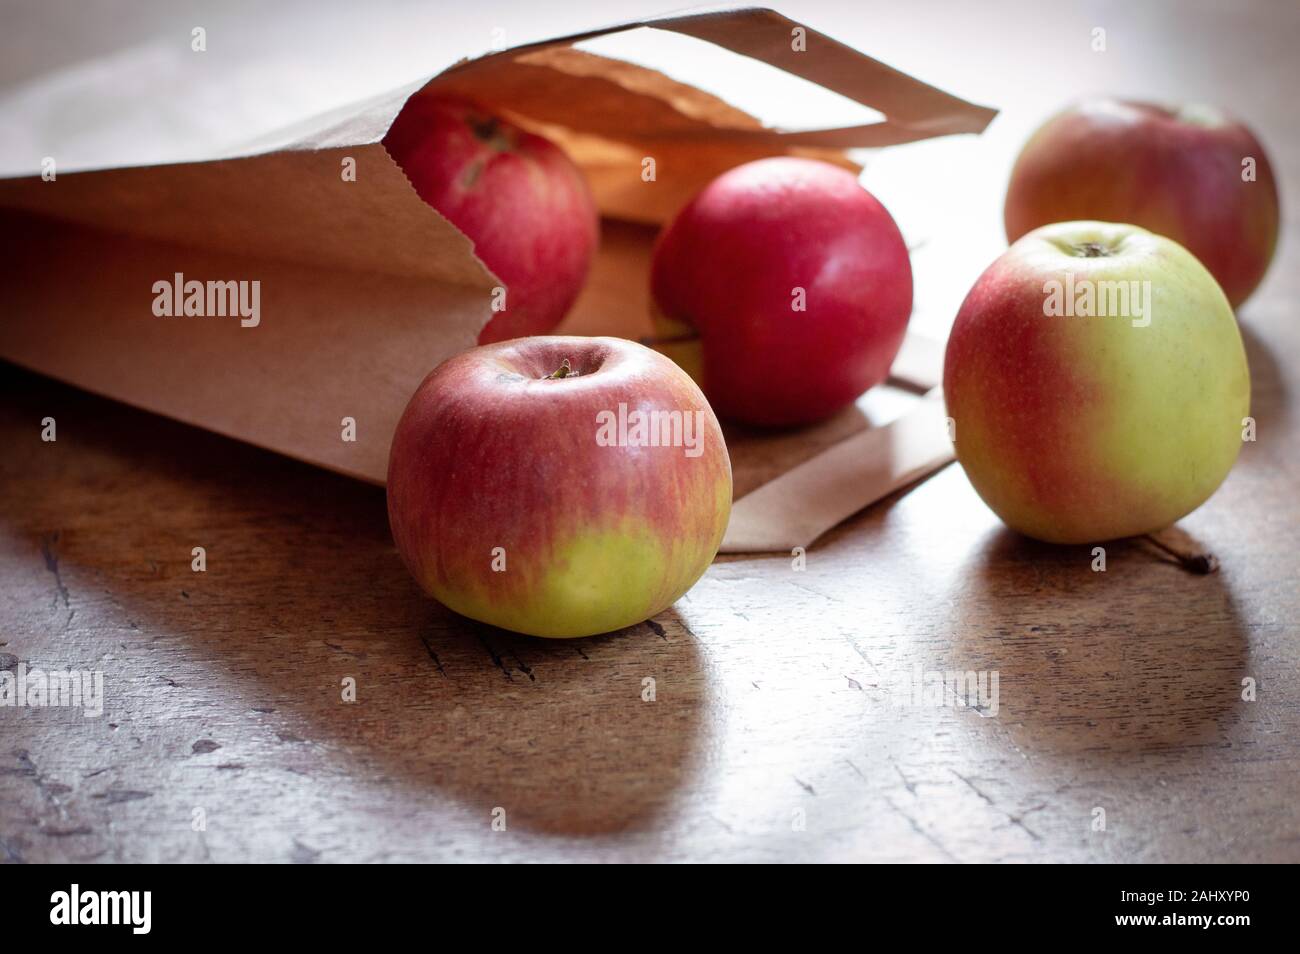 Red healthy apples pouring out of paper shopping bag Stock Photo